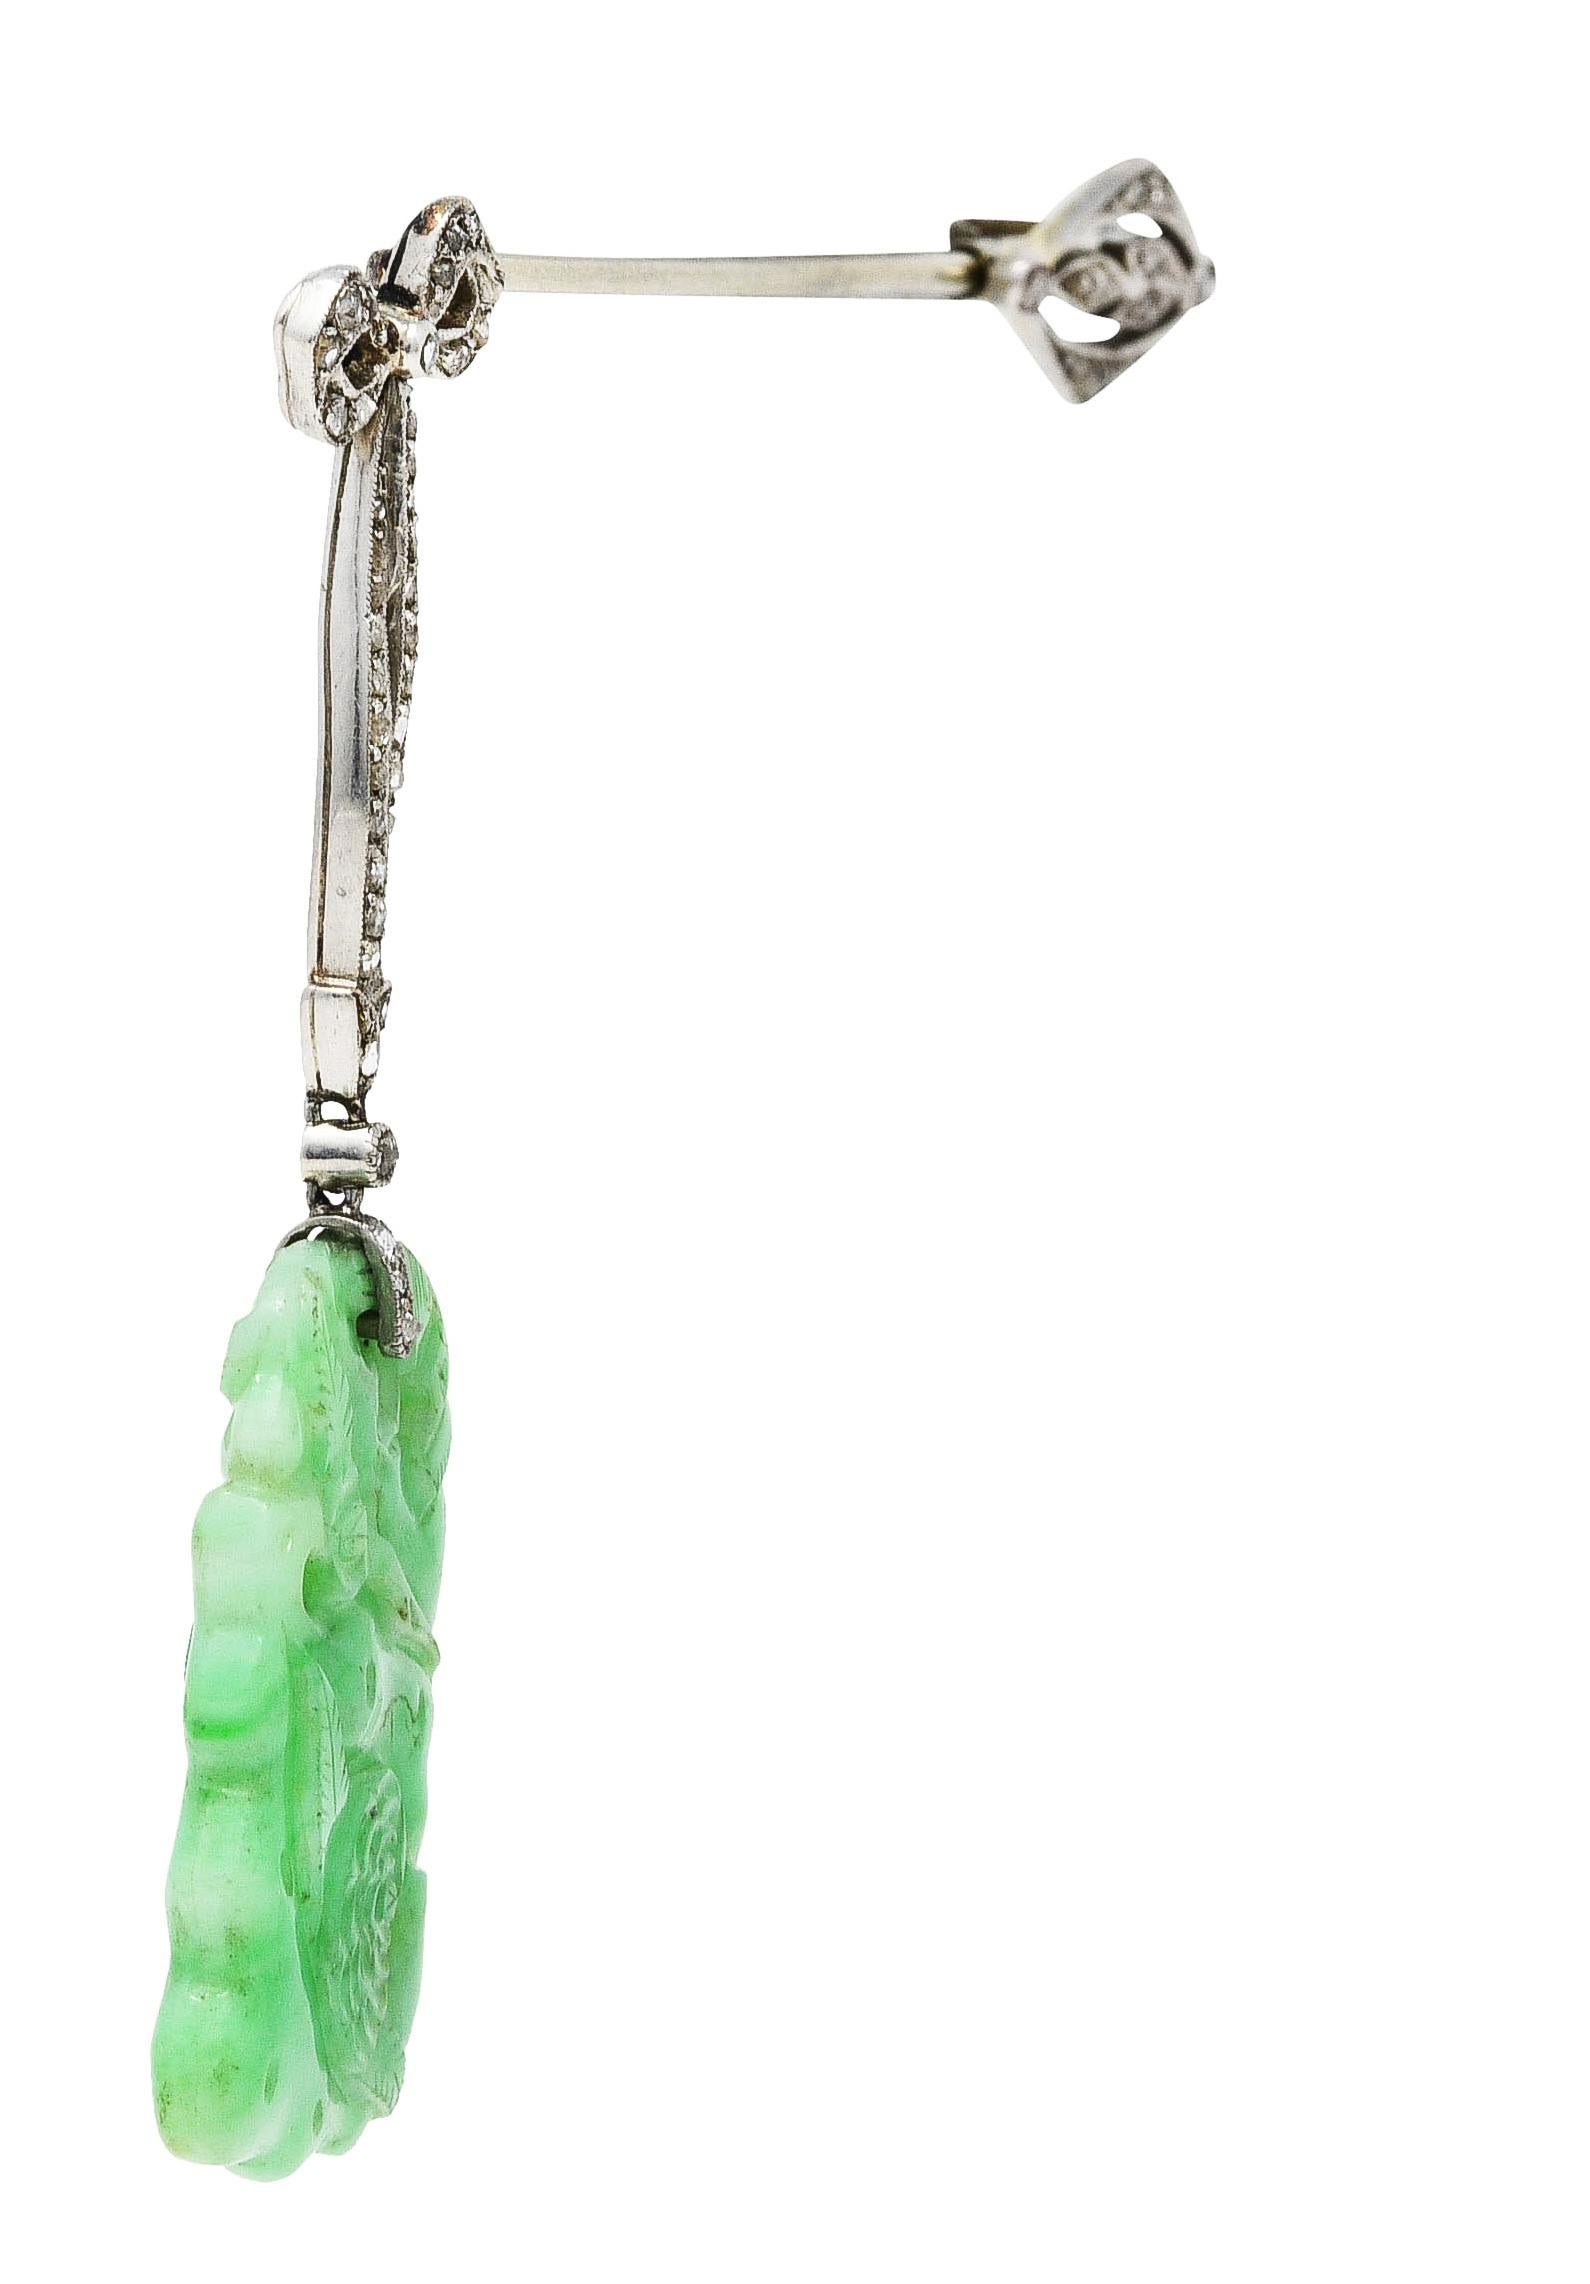 Brooch is designed as jabot style bar brooch

With articulated ribbon motif suspending carved jade drop

Translucent green to pastel green in color with subtle mottling

Accented throughout with rose cut diamonds - quality consistent with